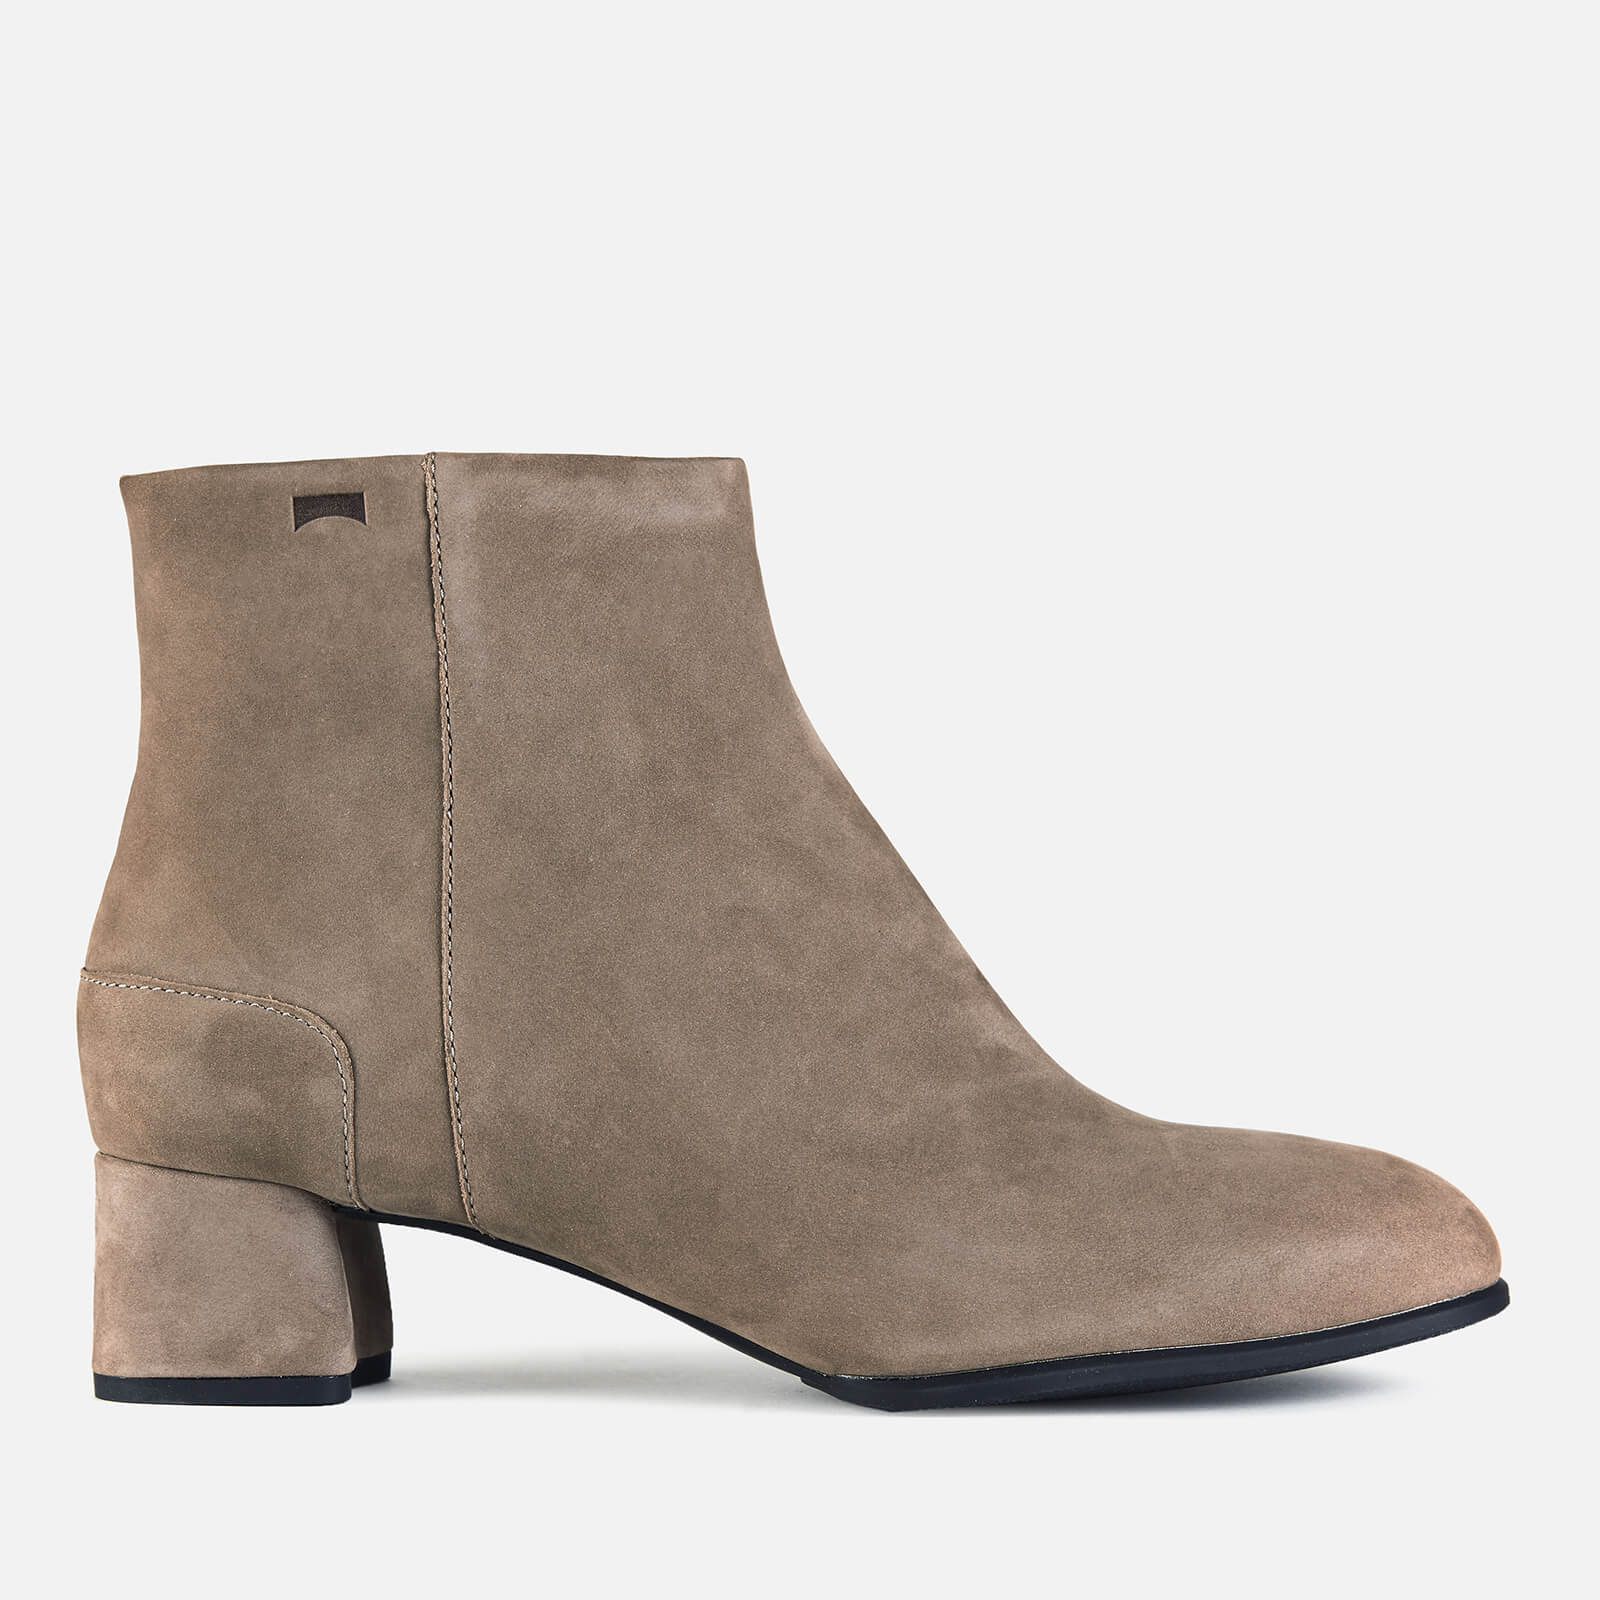 Camper Women's Katie Suede Heeled Ankle Boots - Tan